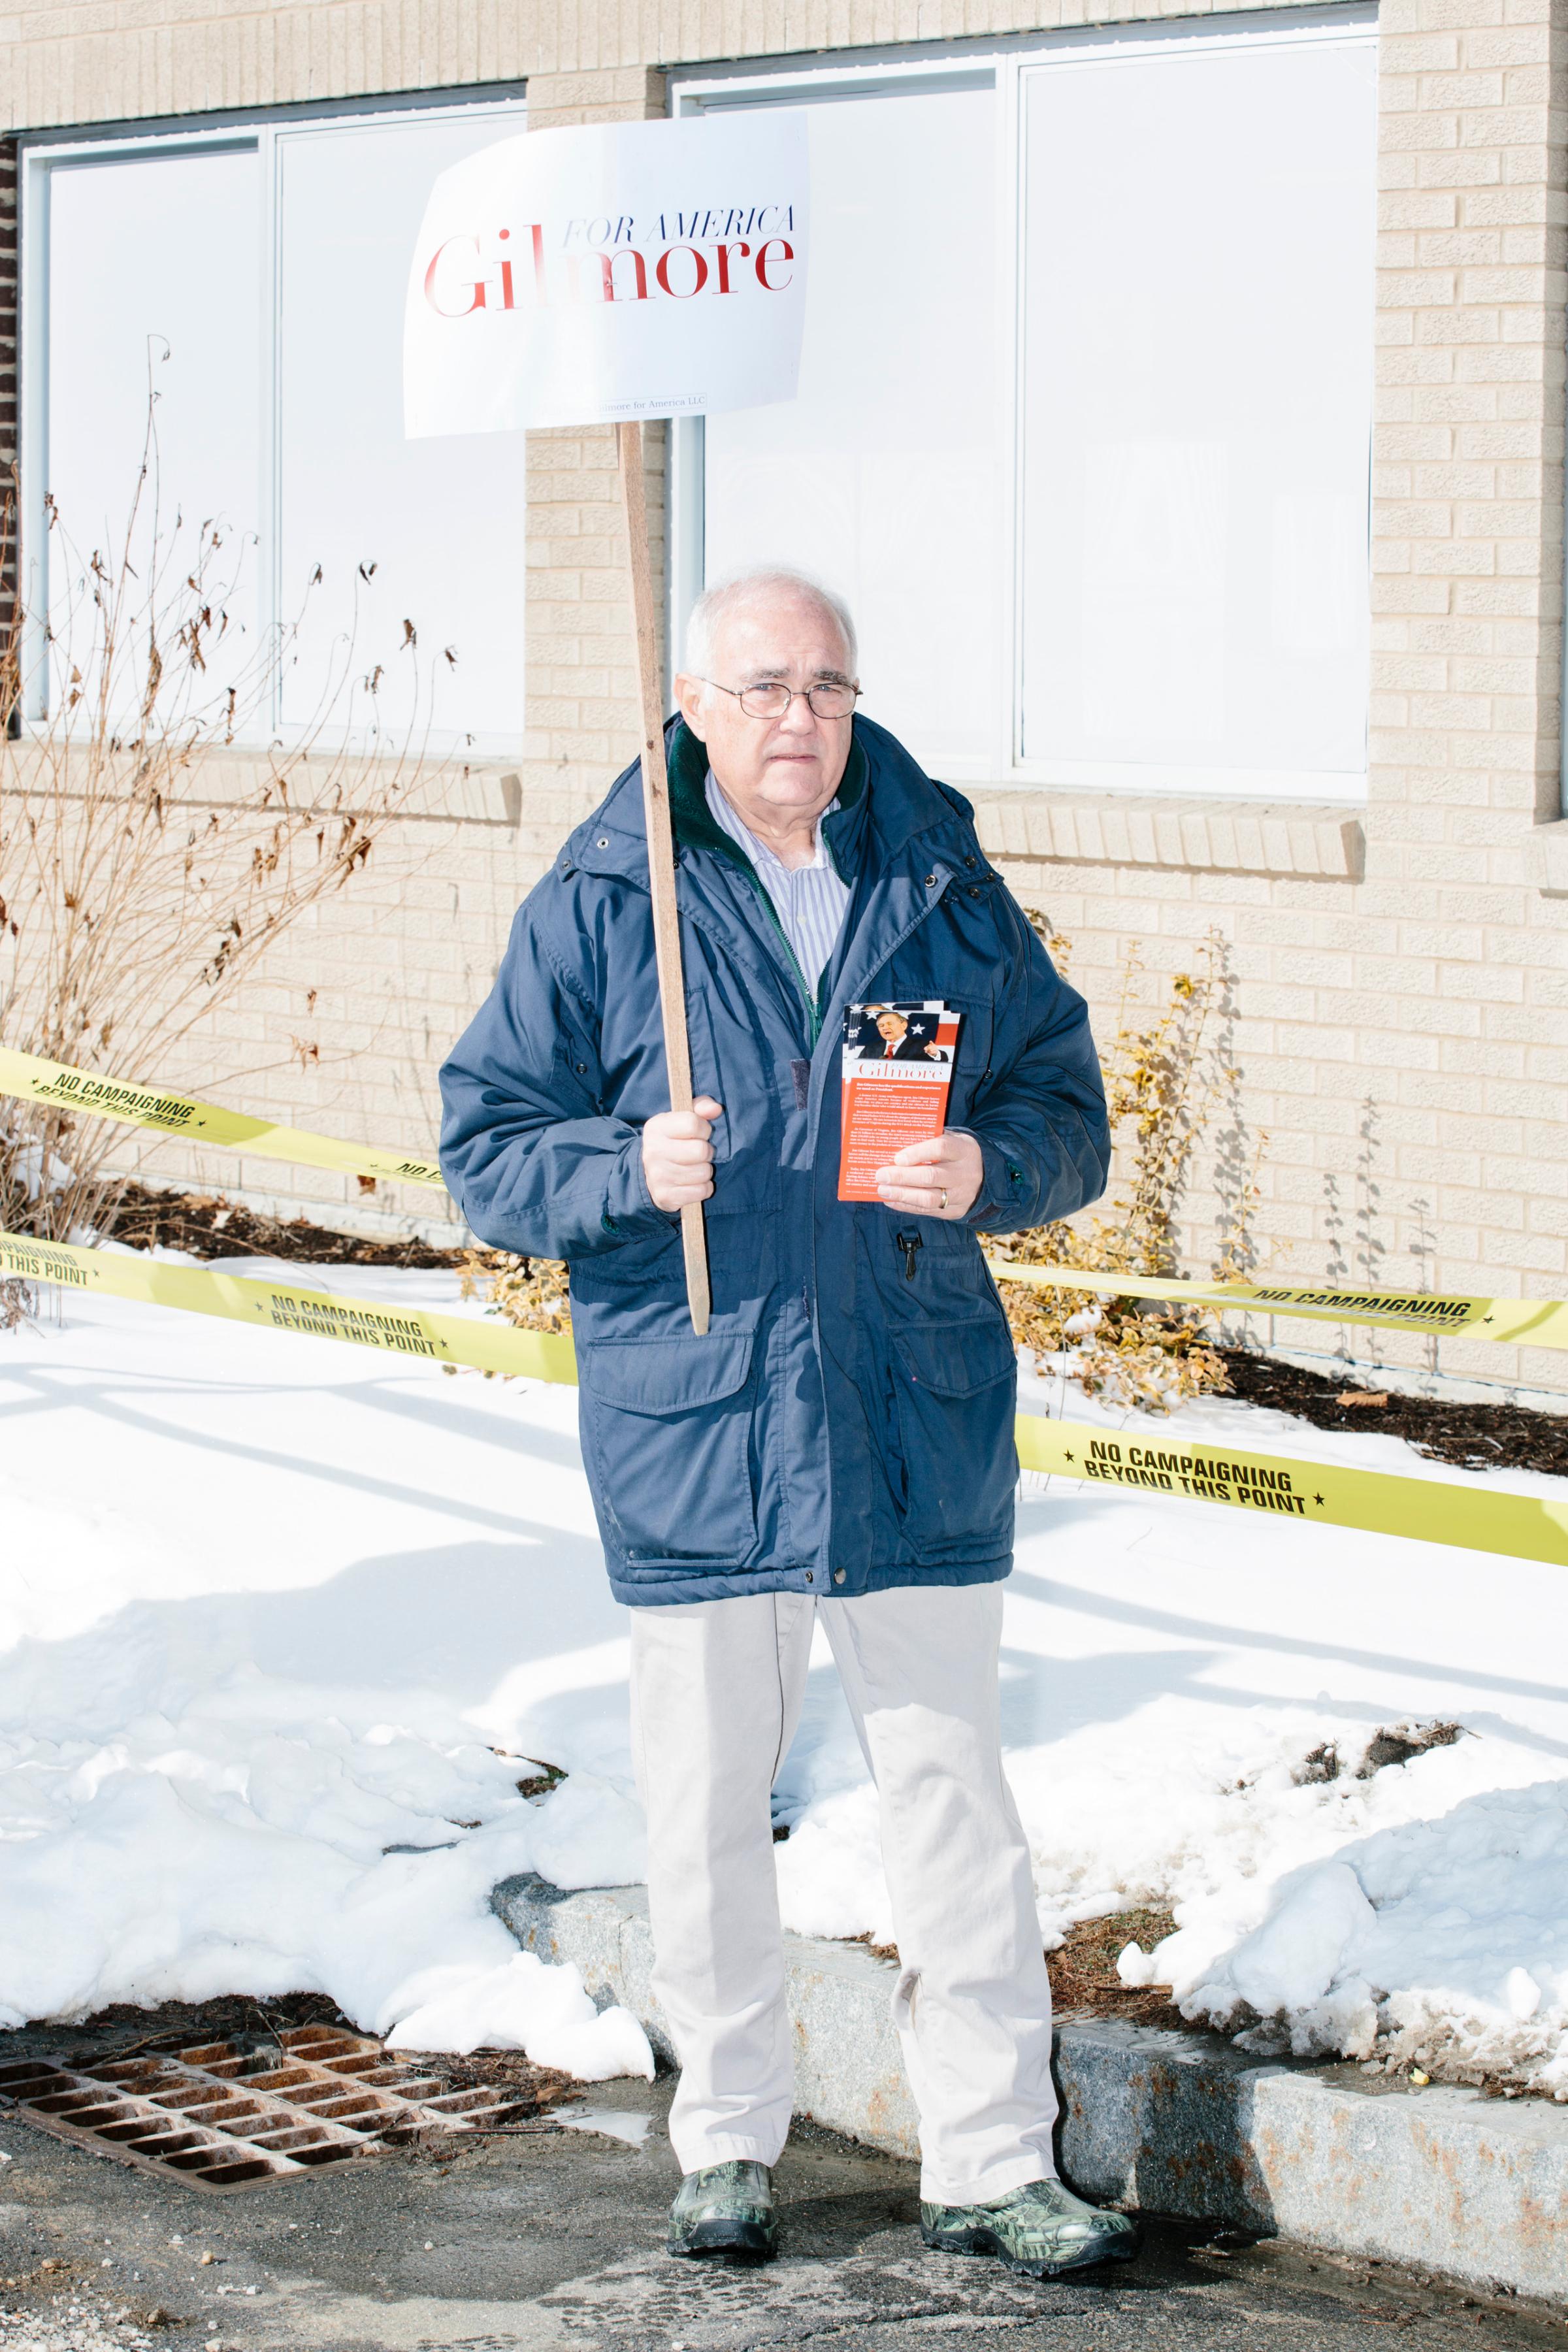 Lloyd Gatling, of Suffolk, Virginia, brother-in-law of former Virginia governor and Republican presidential candidate Jim Gilmore holds campaign signs for the candidate outside the polling location for Manchester Ward 2 at Hillside Middle School in Manchester, New Hampshire, on the day of primary voting, Feb. 9, 2016. Gilmore finished in last place among major Republican candidates still in the race with a total of 150 votes.